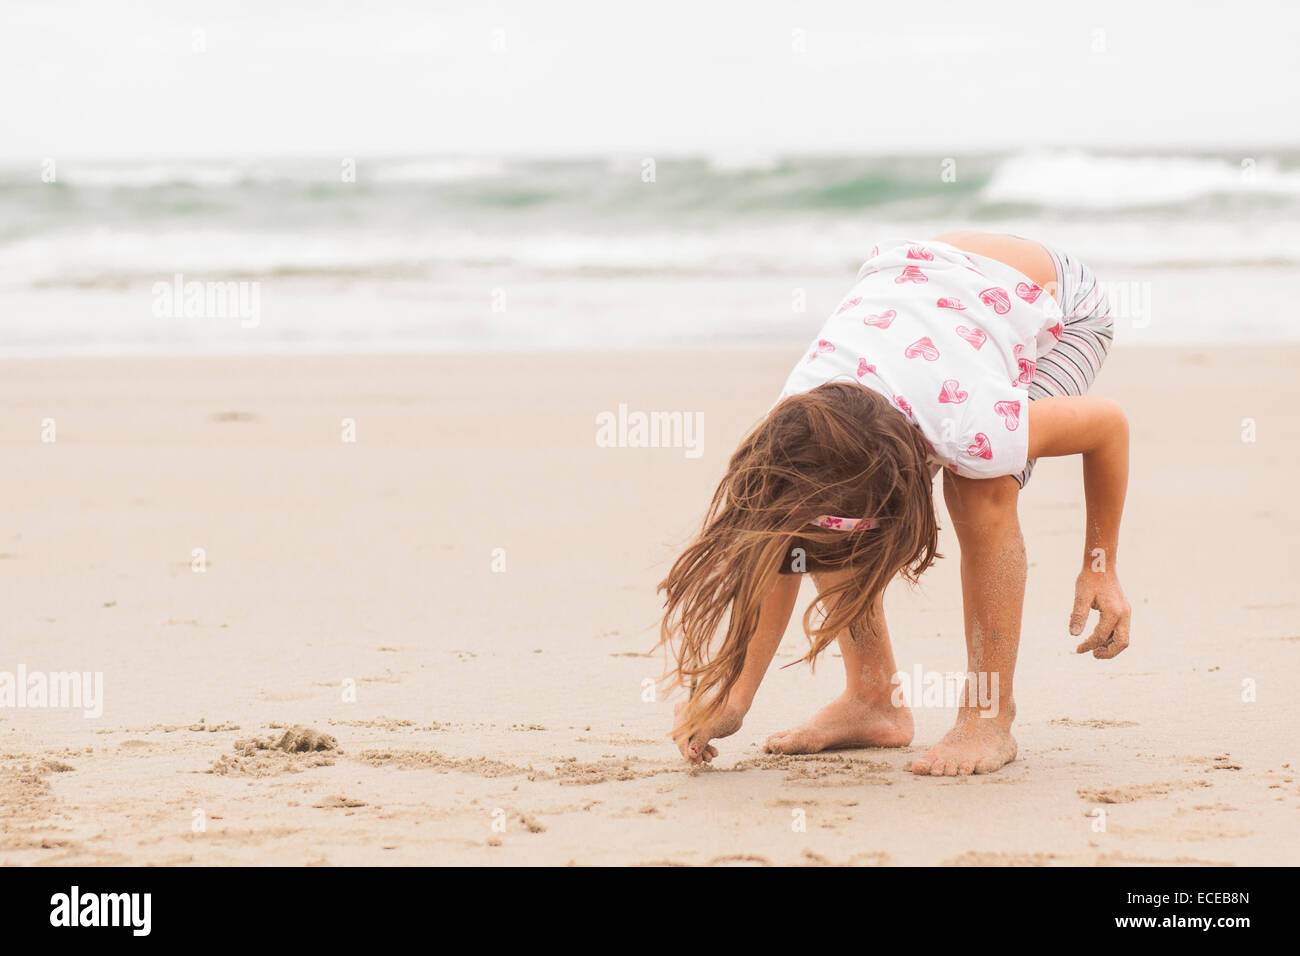 Girl standing on a beach drawing in the sand Stock Photo